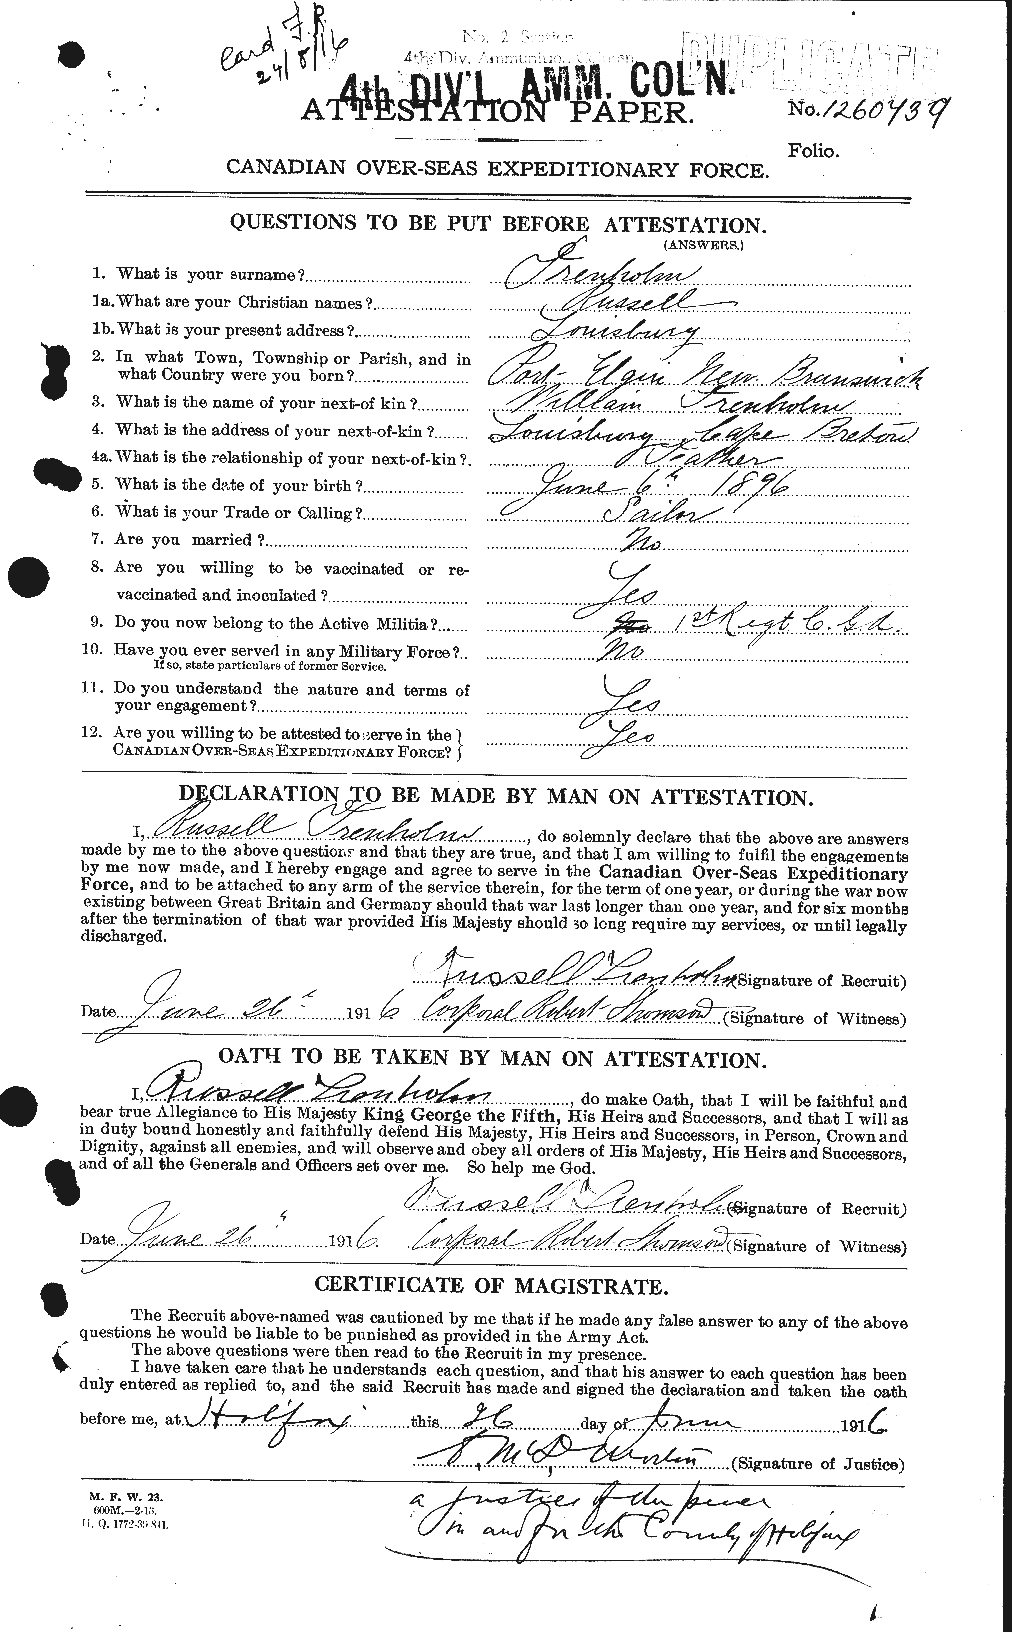 Personnel Records of the First World War - CEF 638469a